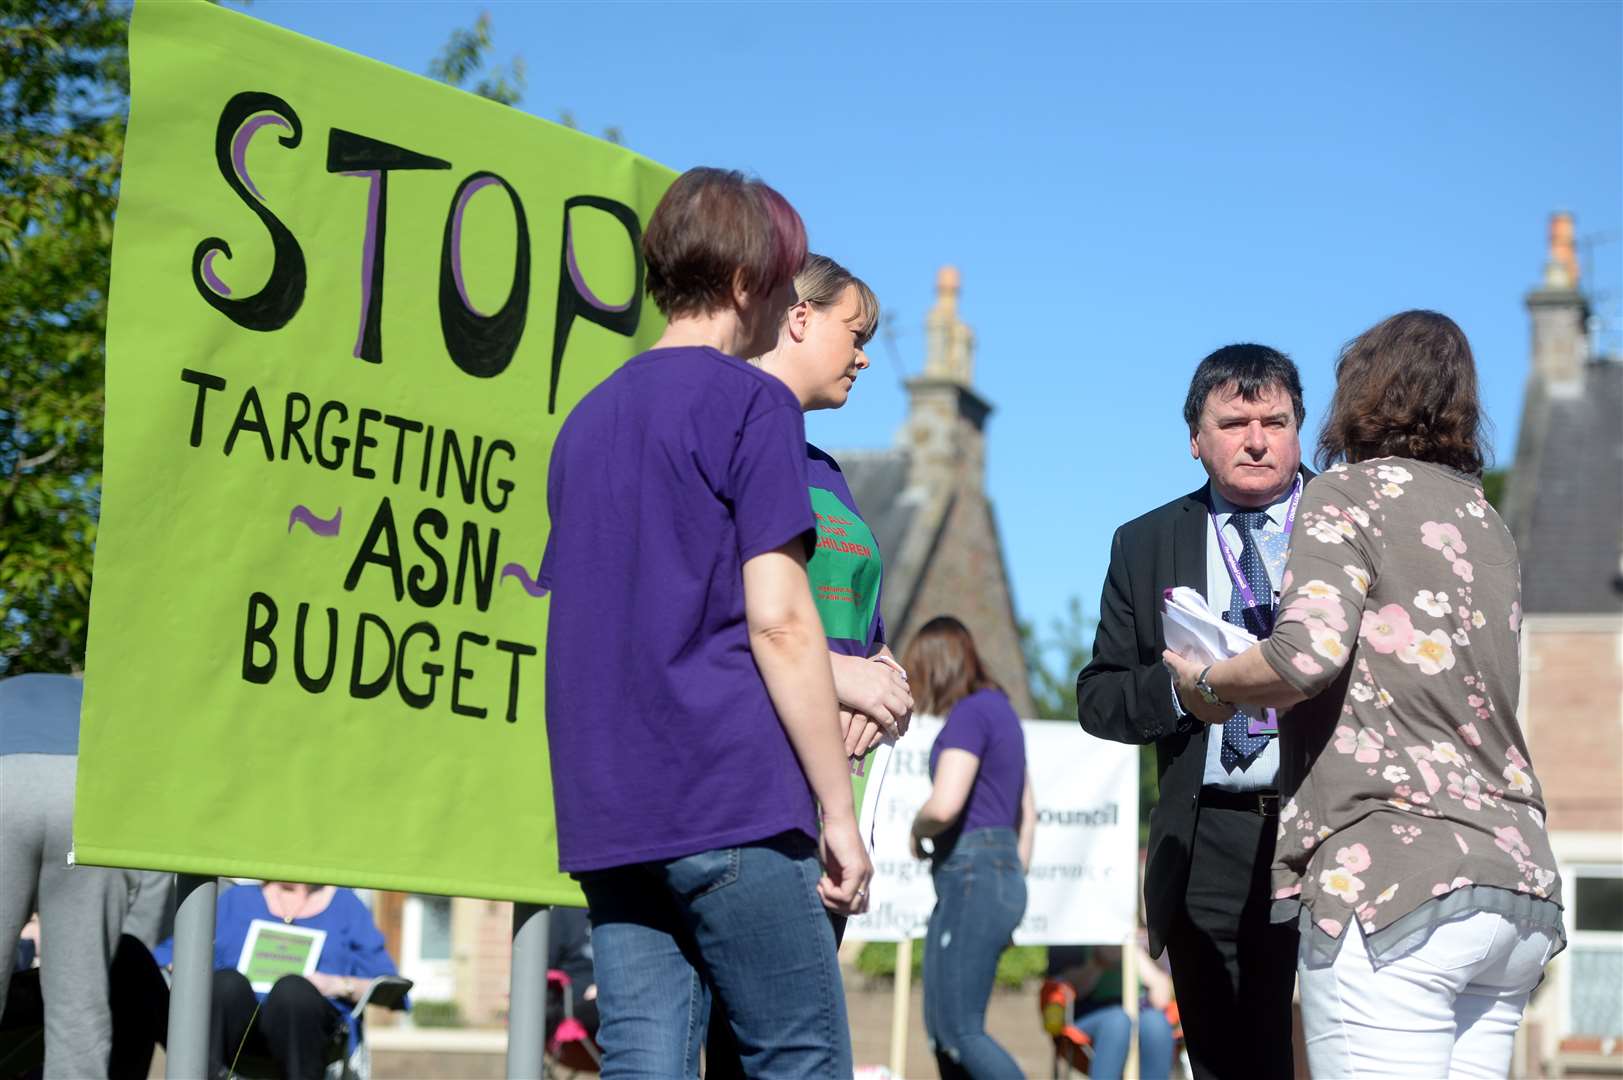 Parents previously lobbied councillors over cuts to ASN provision in Highland schools.